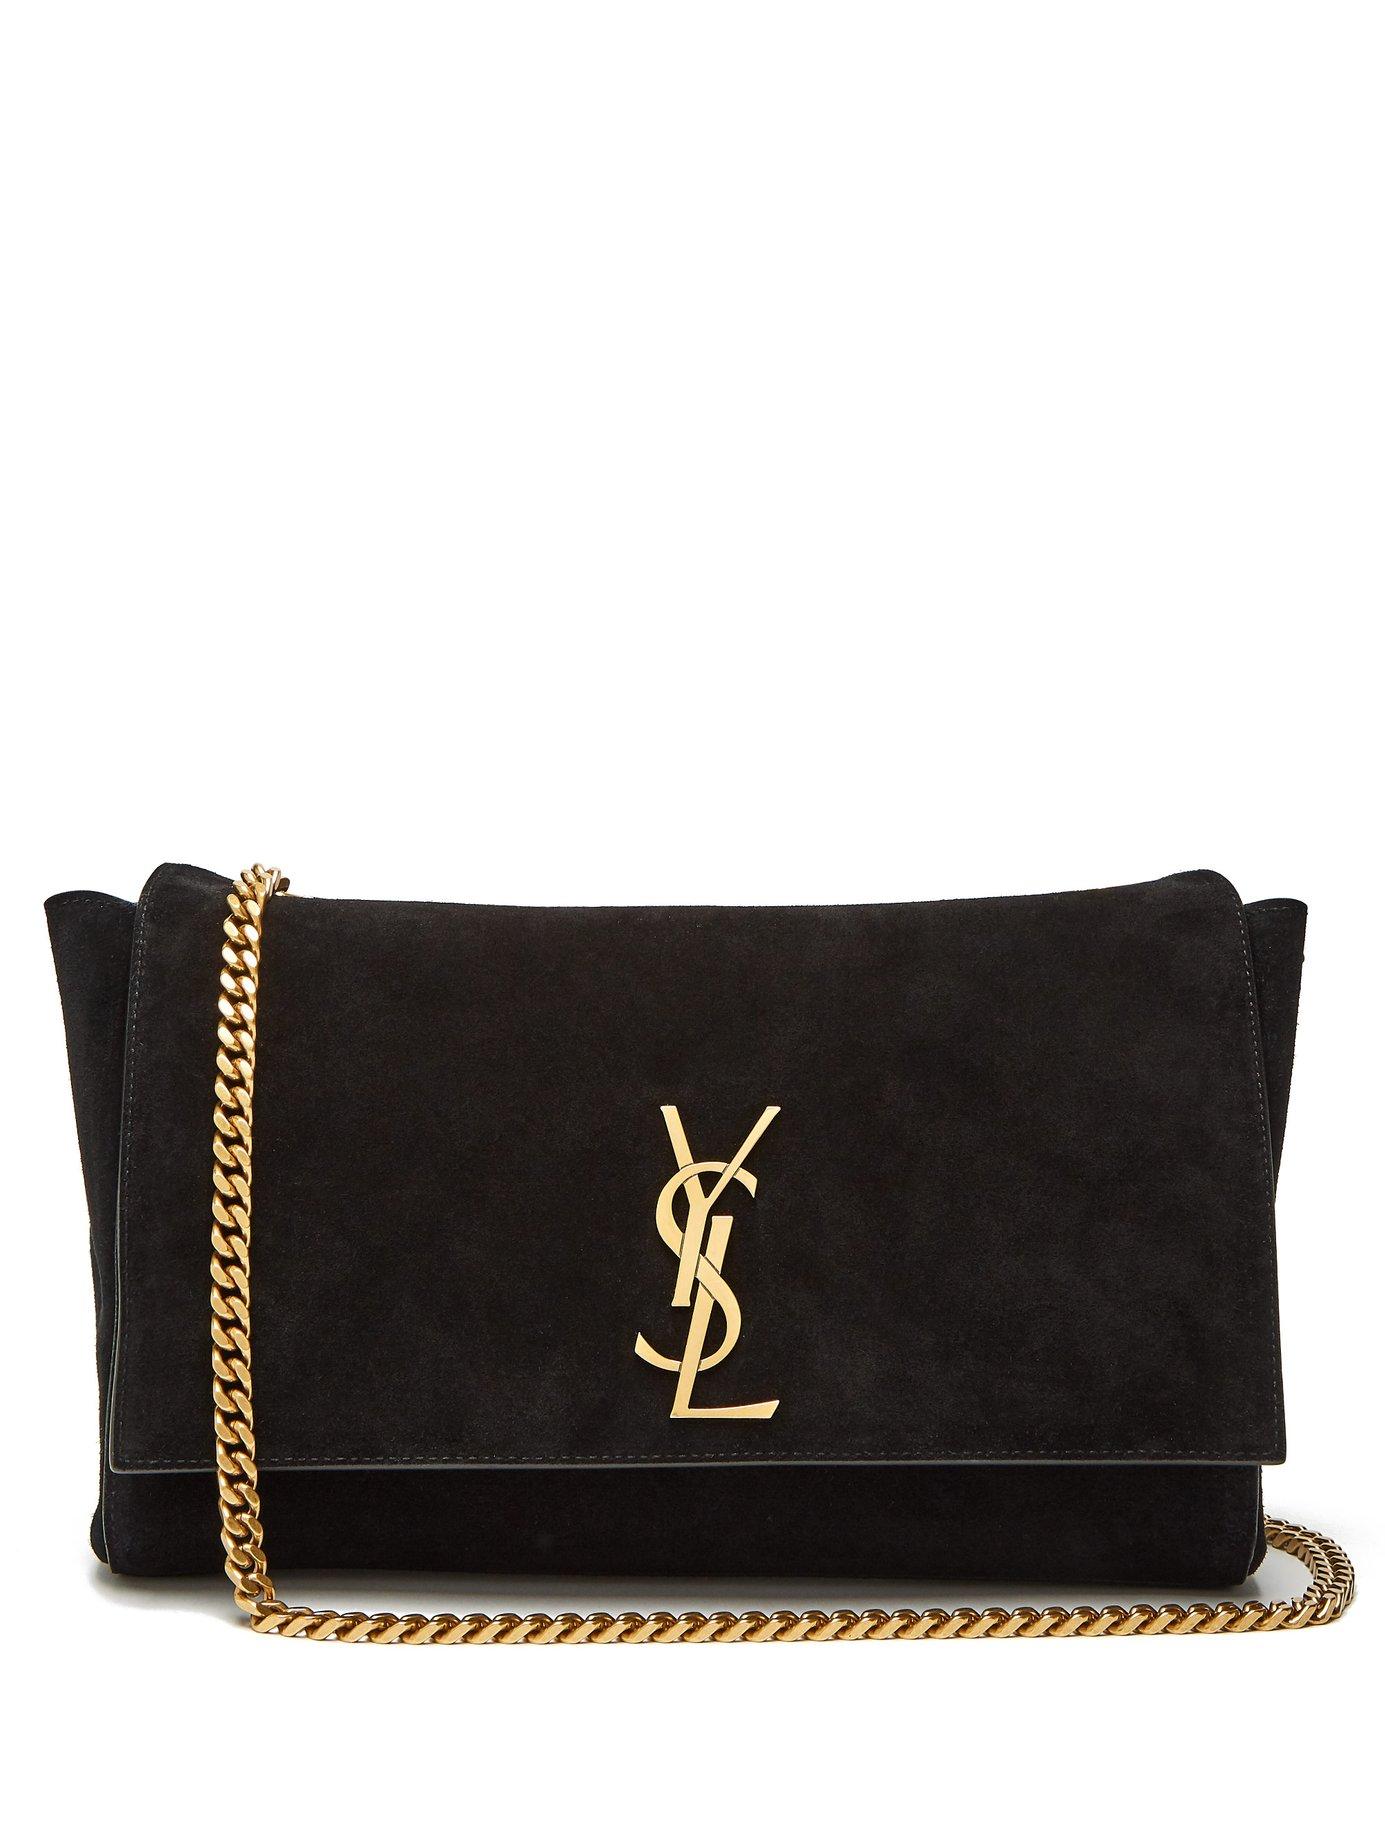 Lyst - Saint Laurent Kate Reversible Leather And Suede Shoulder Bag in ...